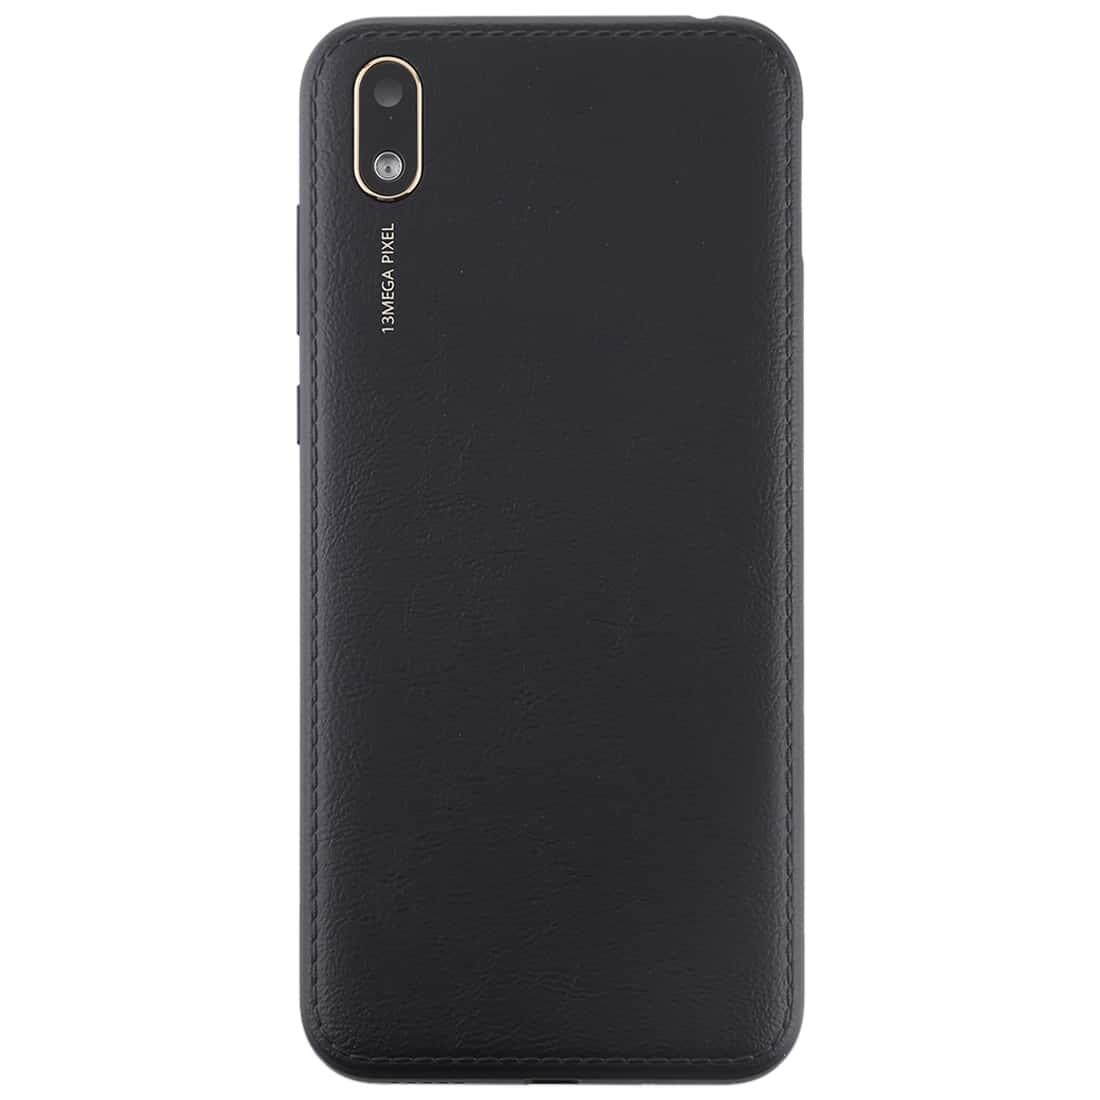 Back Panel Housing Body for Huawei Y5 2019 Black with Camera Lens